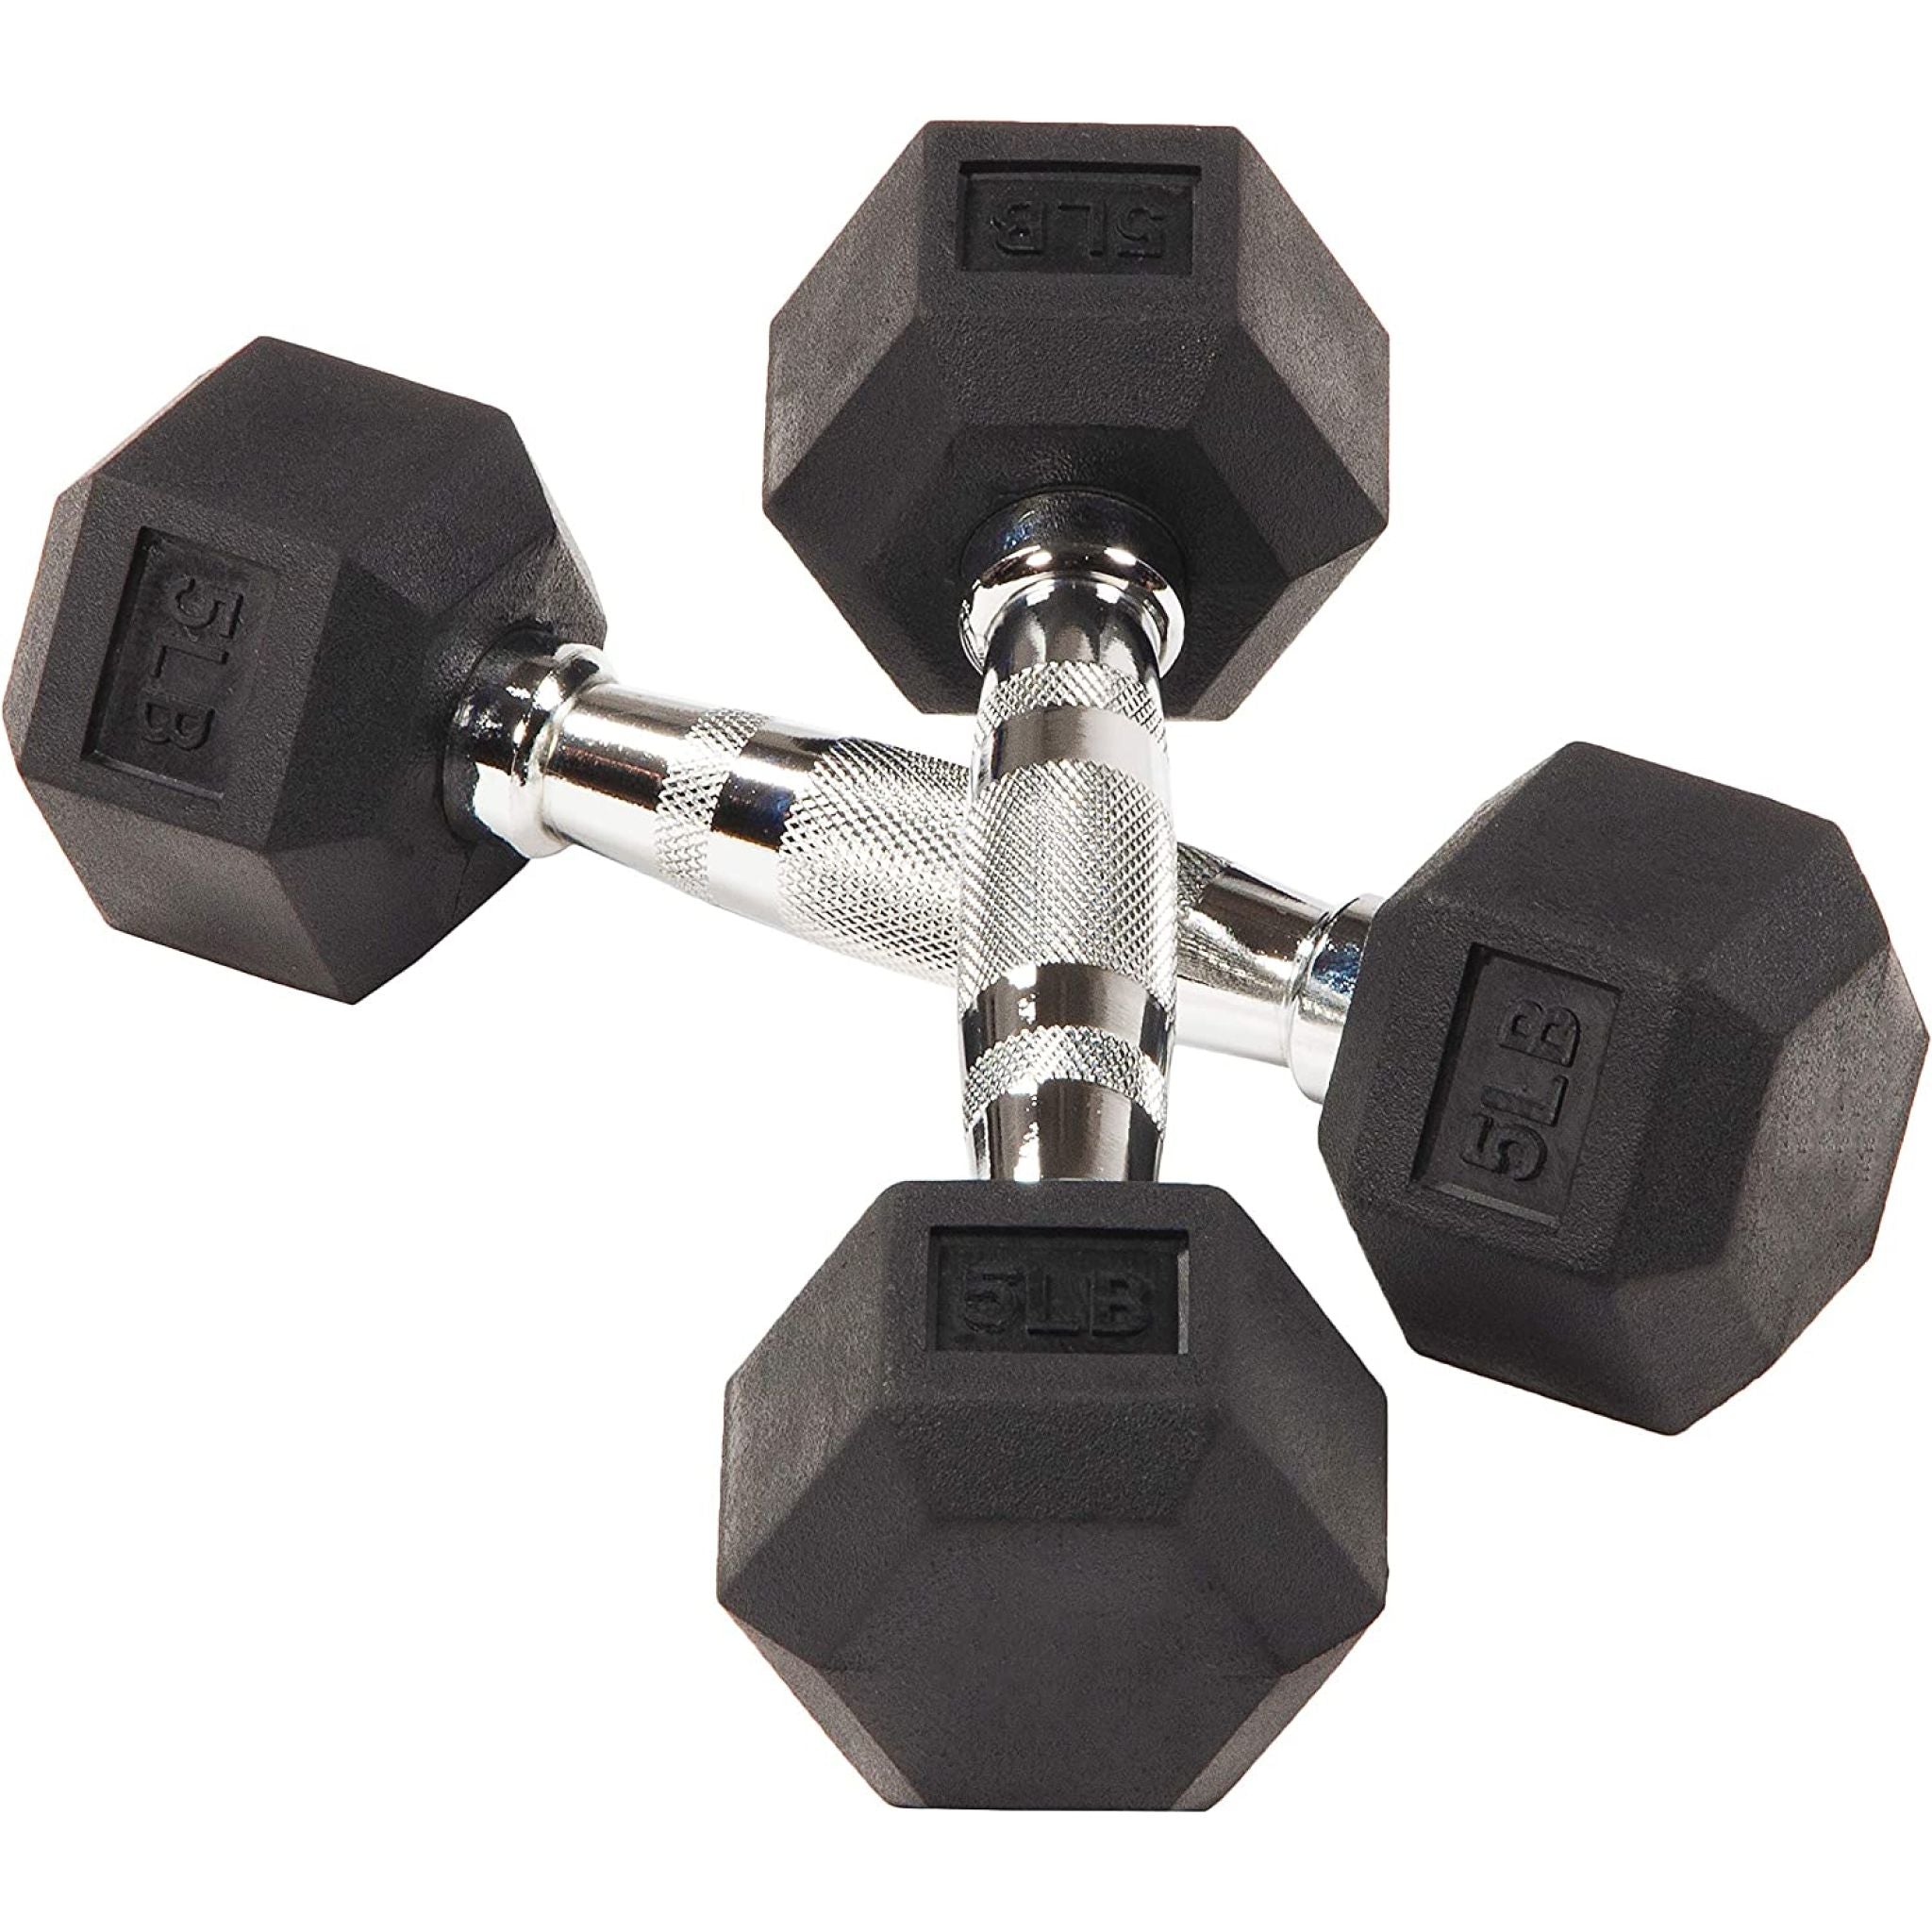 5Lb rubber hex dumbbells pair crossed over each other at Express Gym Supply